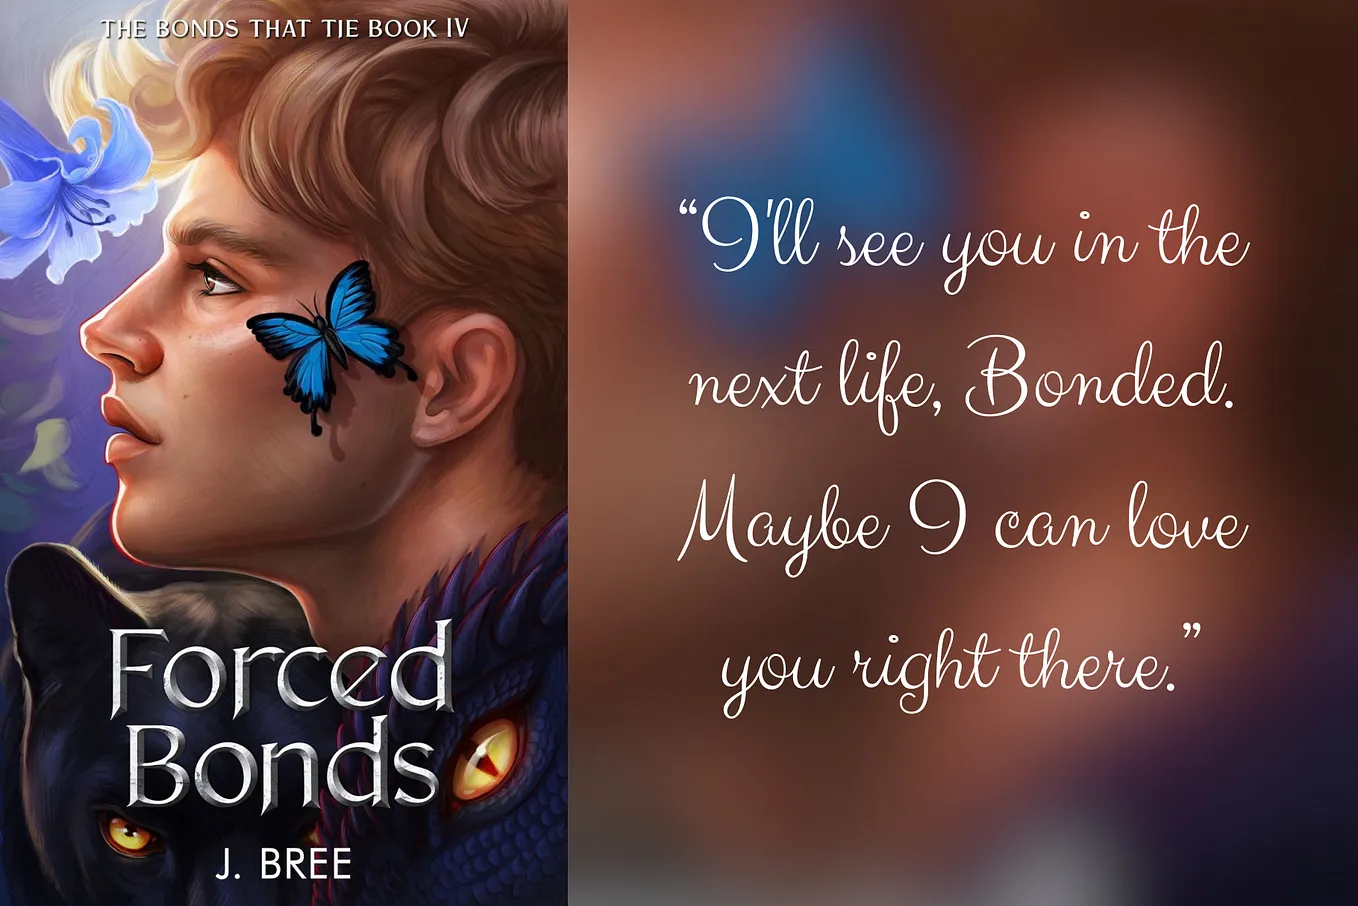 Forced Bonds (The Bonds that Tie 4) | A glimpse into the pages of this fourth book in the series